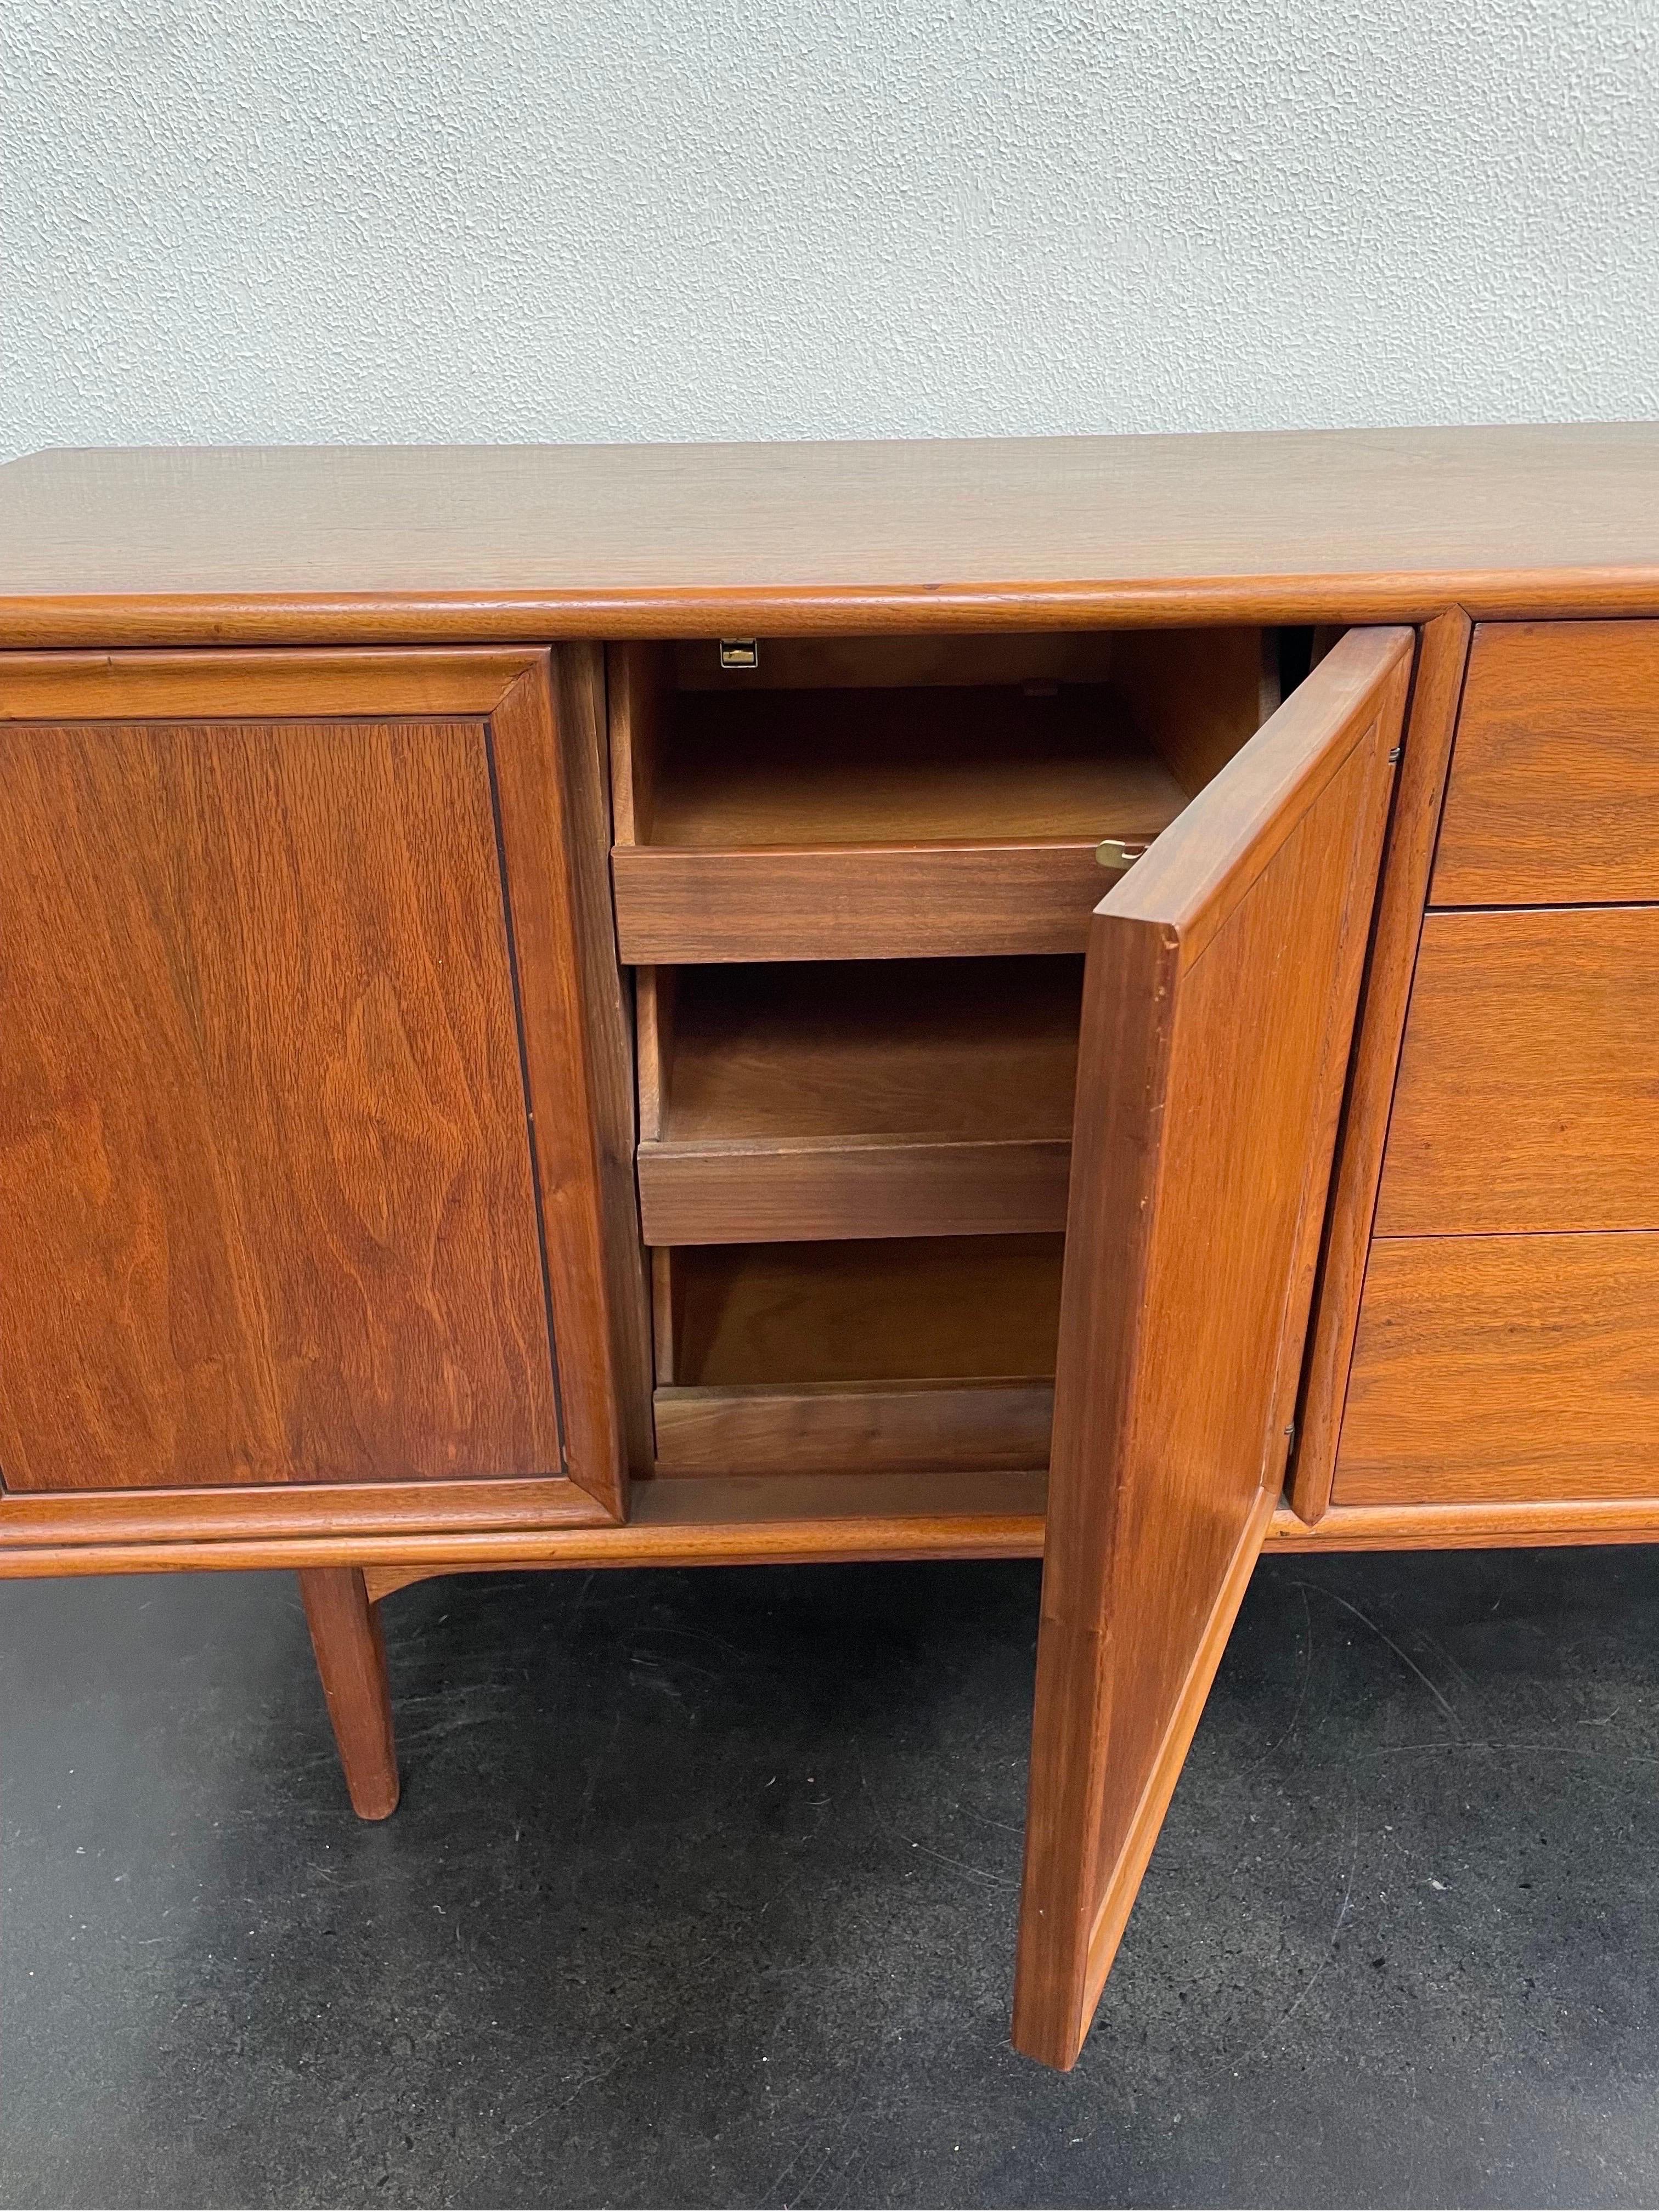 Vintage Mid-Century Modern credenza that could also be used as a dresser. This beautiful walnut wood credenza is designed by Kipp Stewart for Drexel and features four primary drawers with the original porcelain knobs.